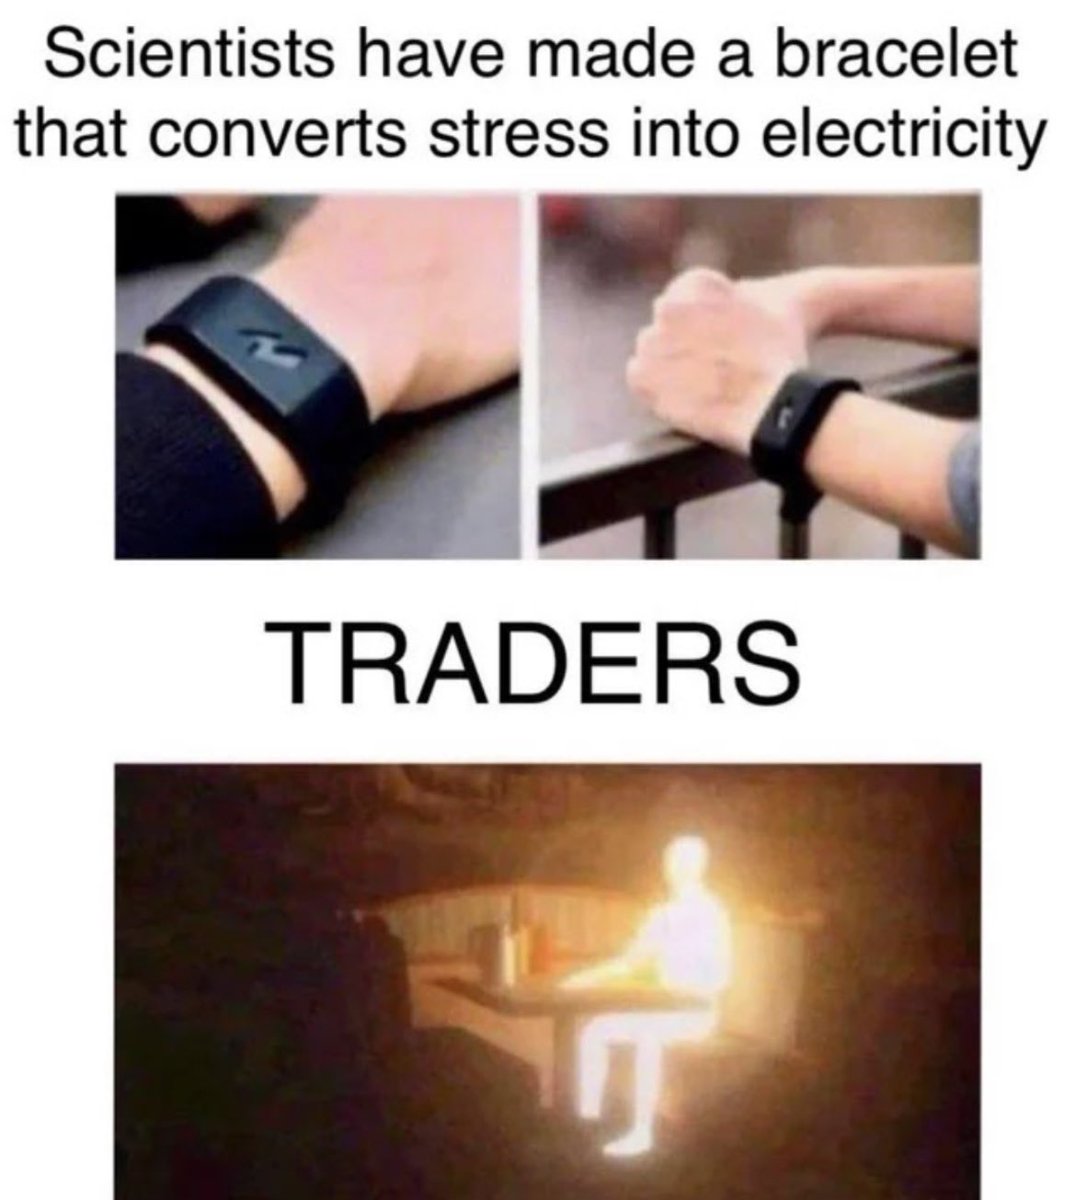 RT @wallstmemes: We could power the national grid https://t.co/m7AyYOvZbE